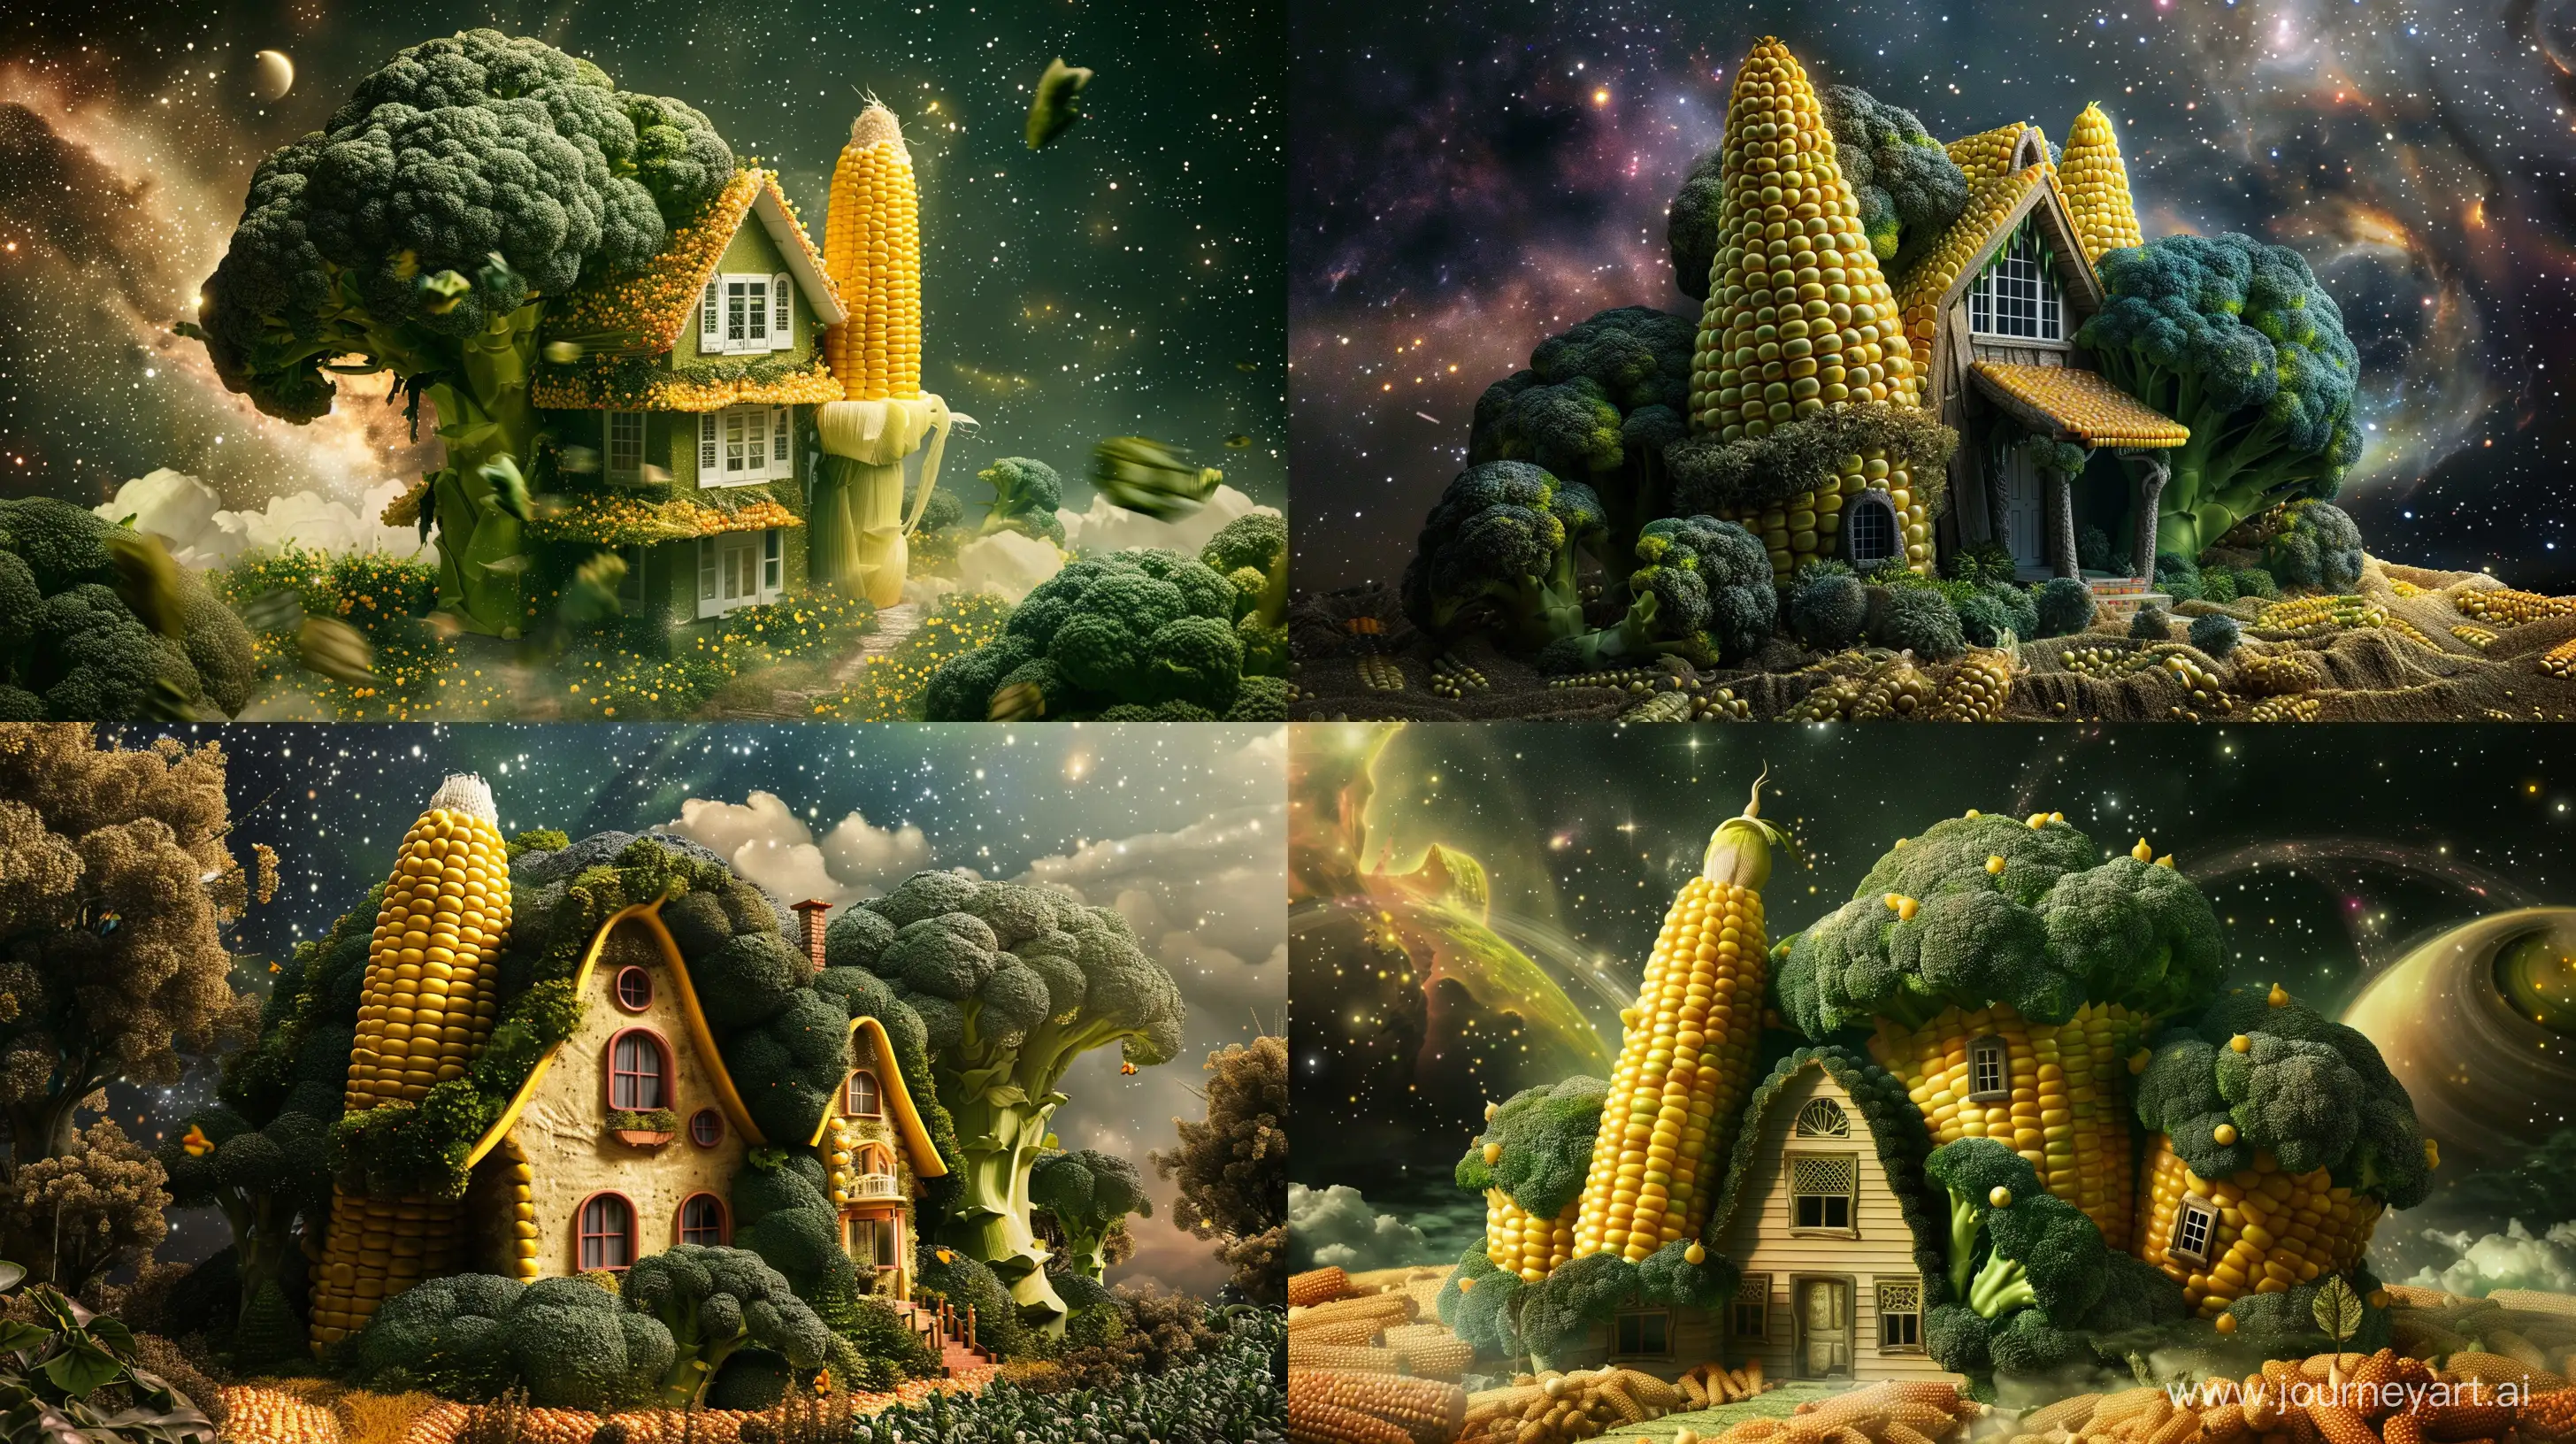 Fantasy-Corn-and-Broccoli-Mansion-in-the-Galactic-Realm